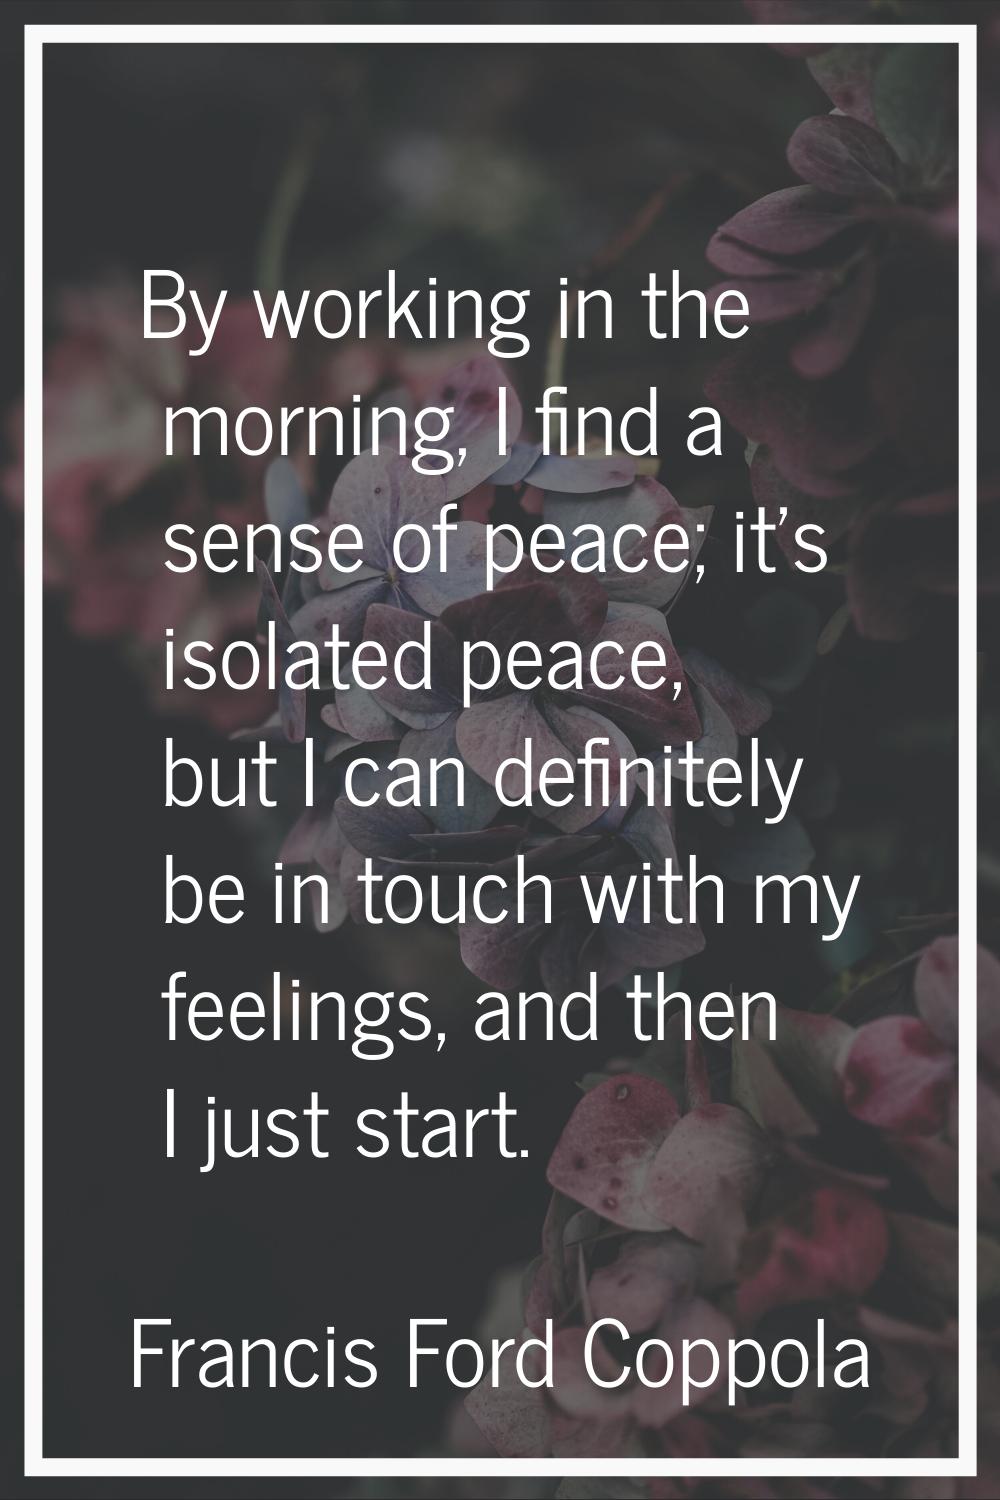 By working in the morning, I find a sense of peace; it's isolated peace, but I can definitely be in